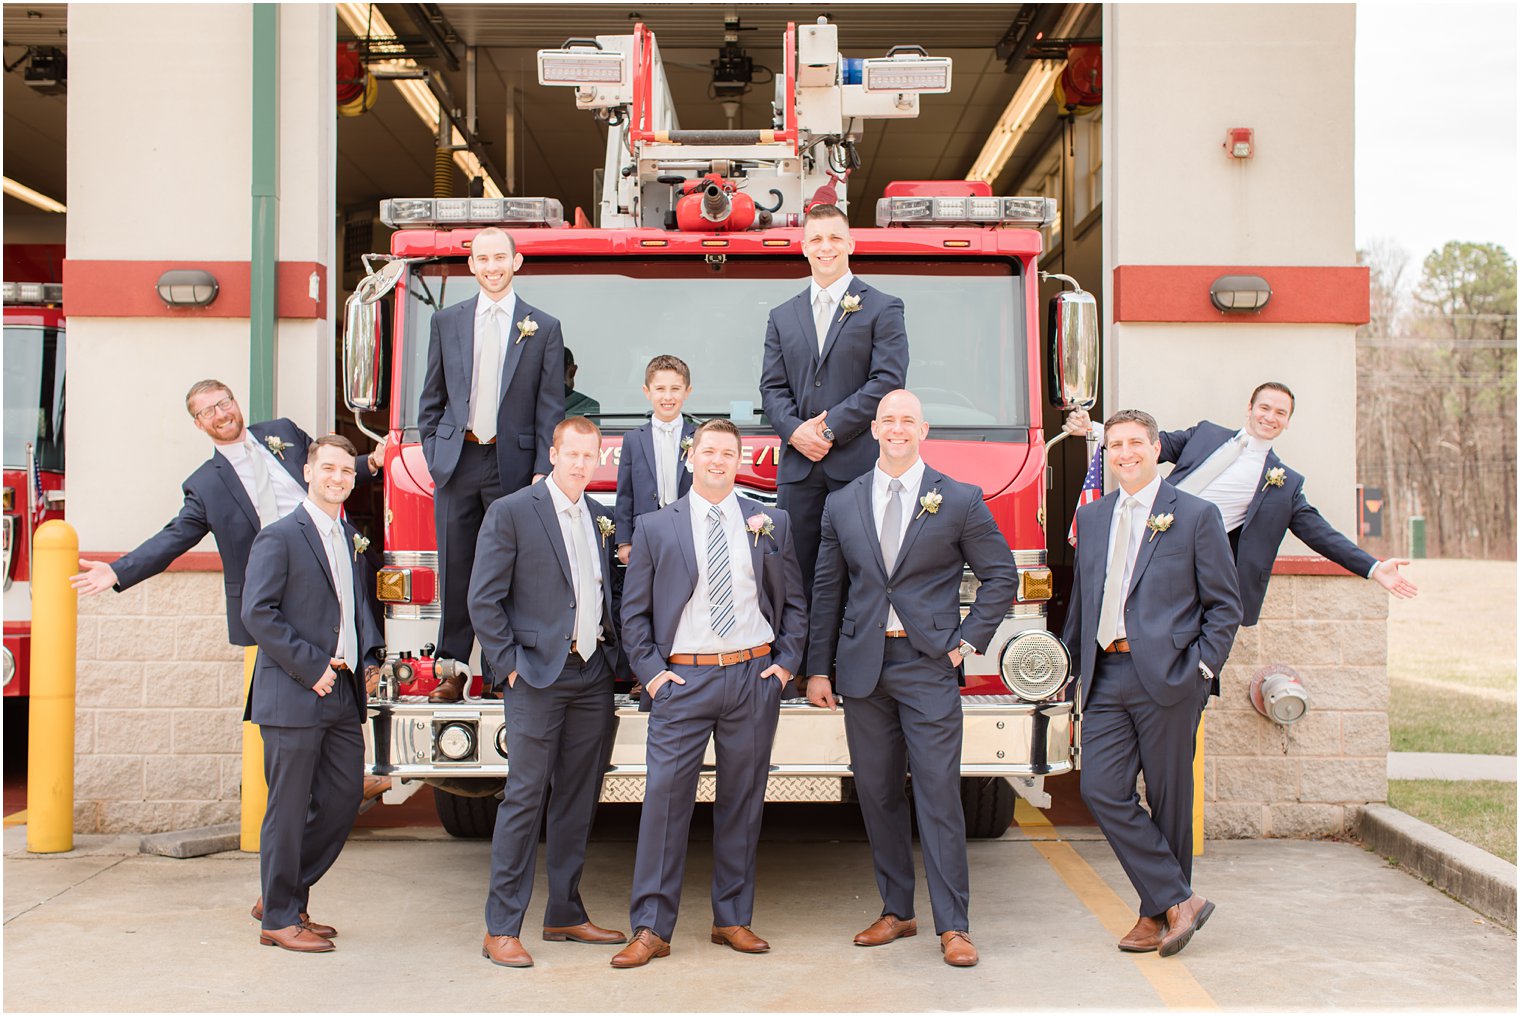 Groom and groomsmen with fire truck